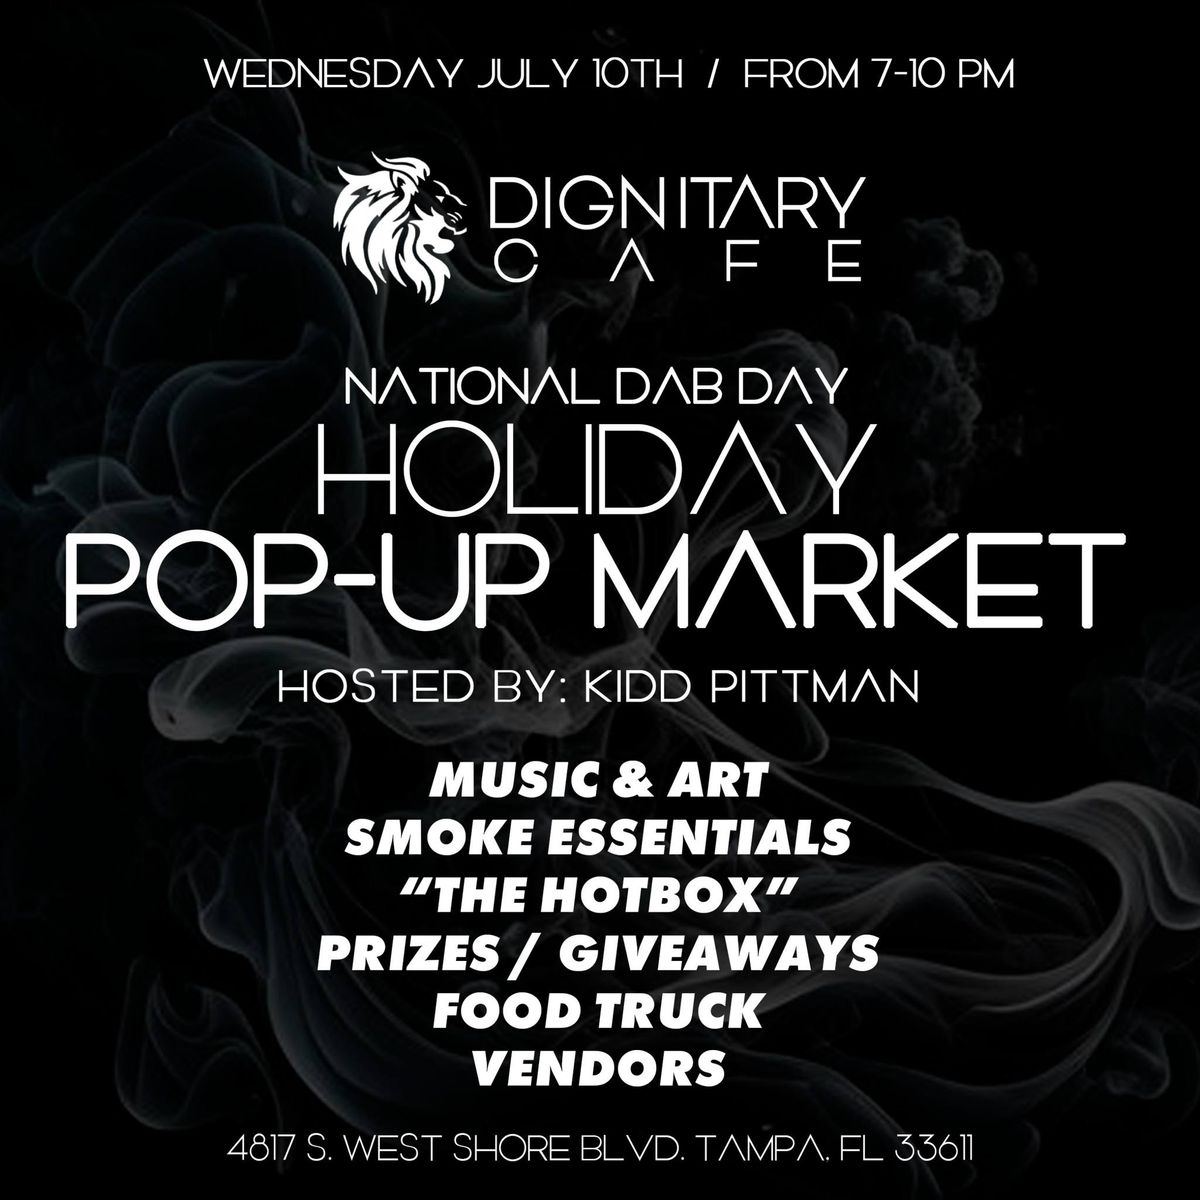 7\/10 DAB DAY Event: Pop-Up Market Hosted by Kidd Pittman